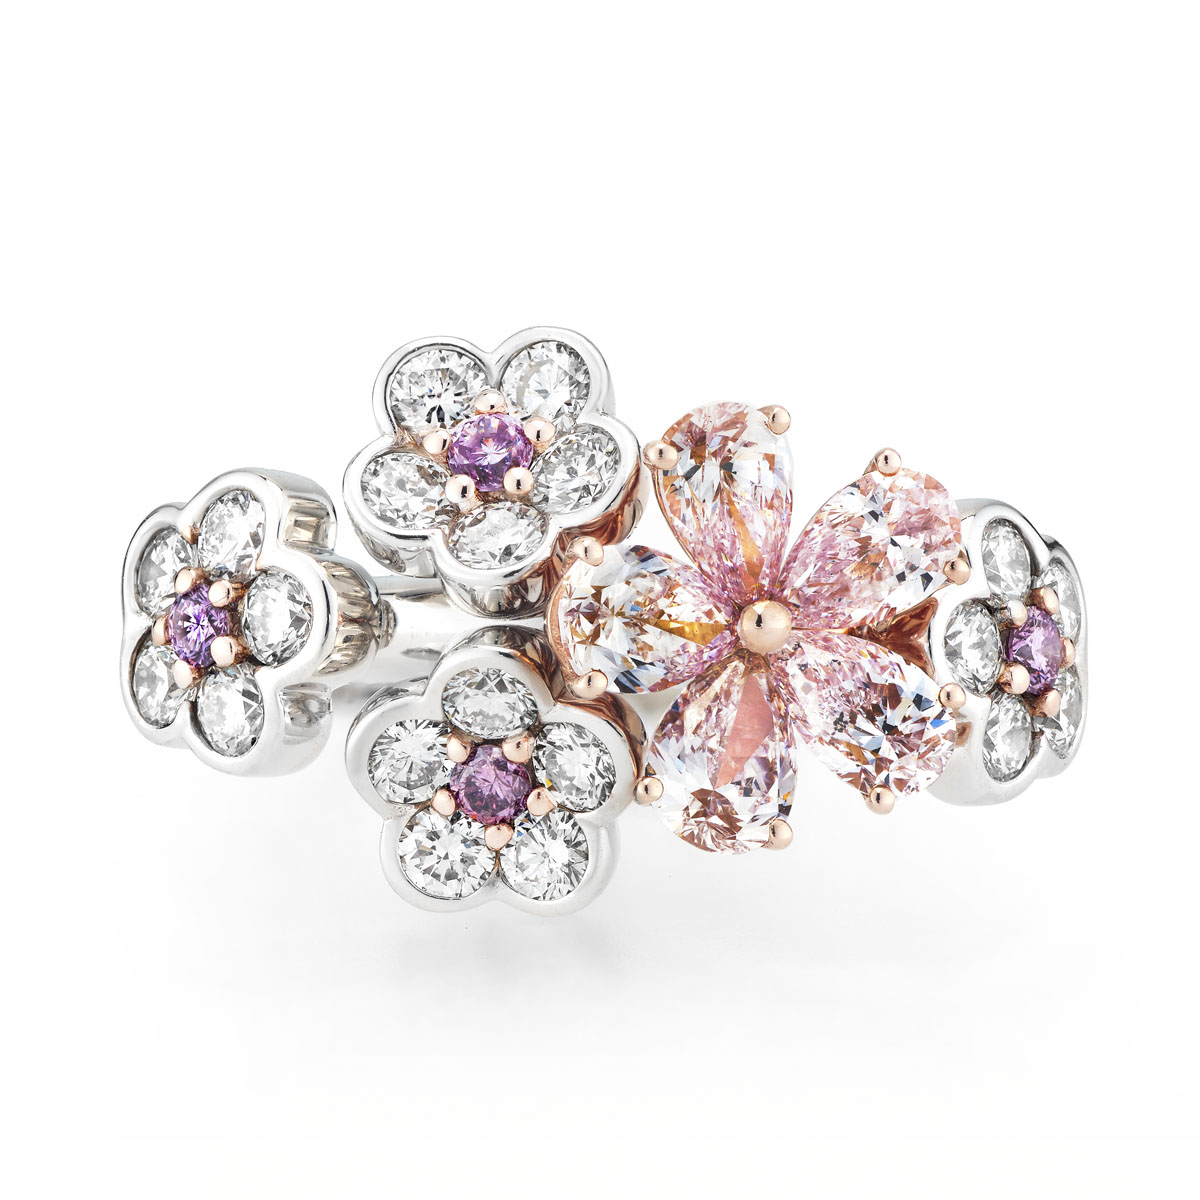 Unique Loves Me Lots Pink & White Diamond Ring by Jewel Connoisseur